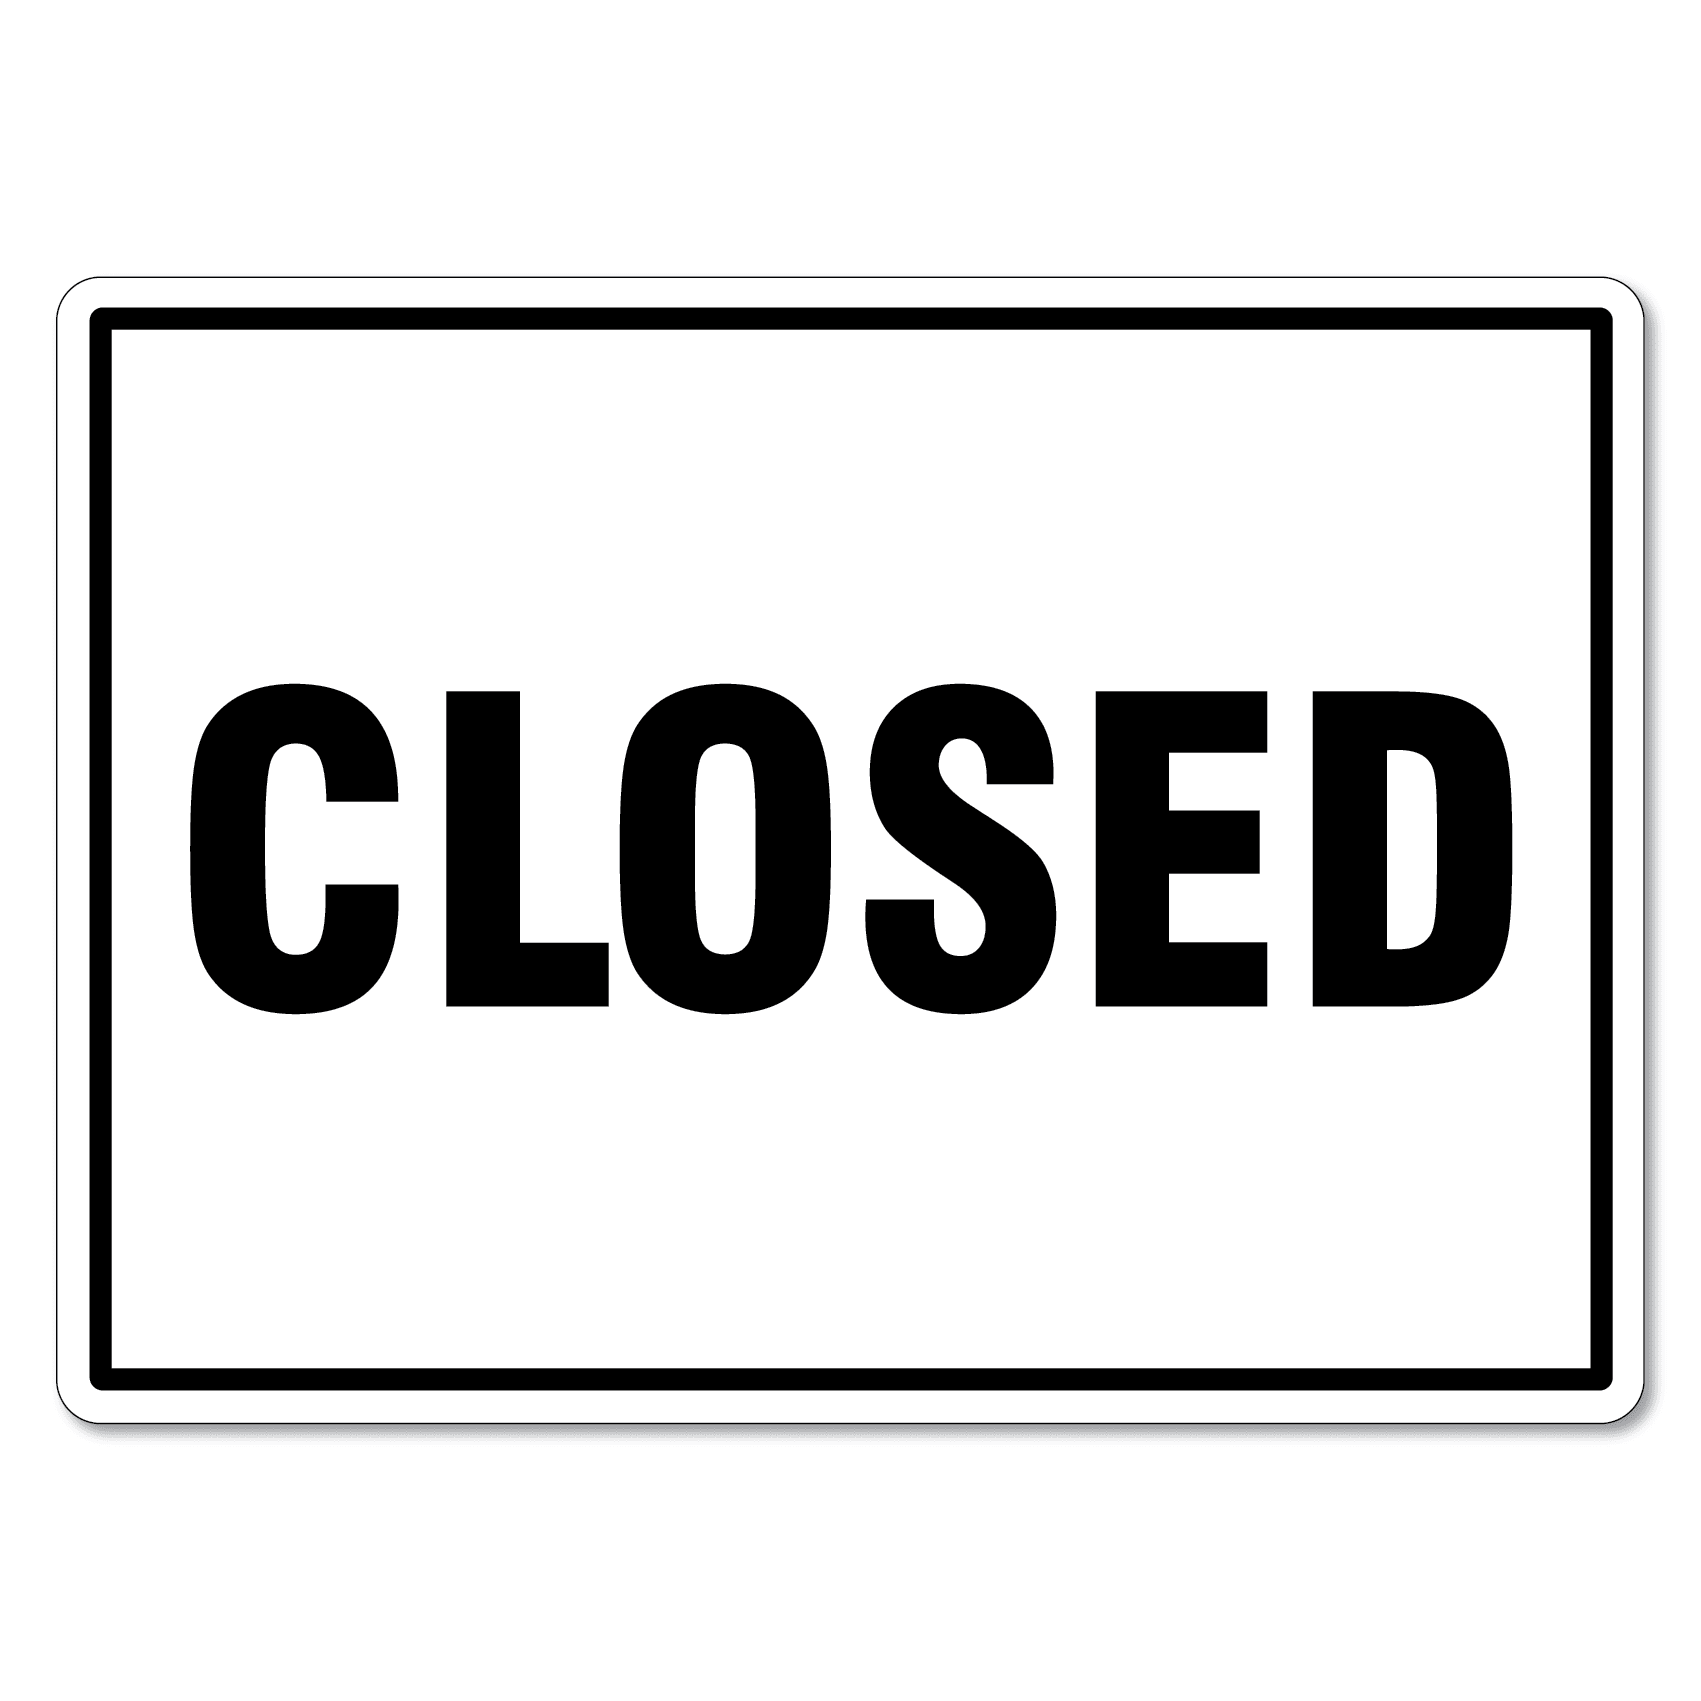 Sorry We Are Closed PNG Transparent Images Free Download, Vector Files